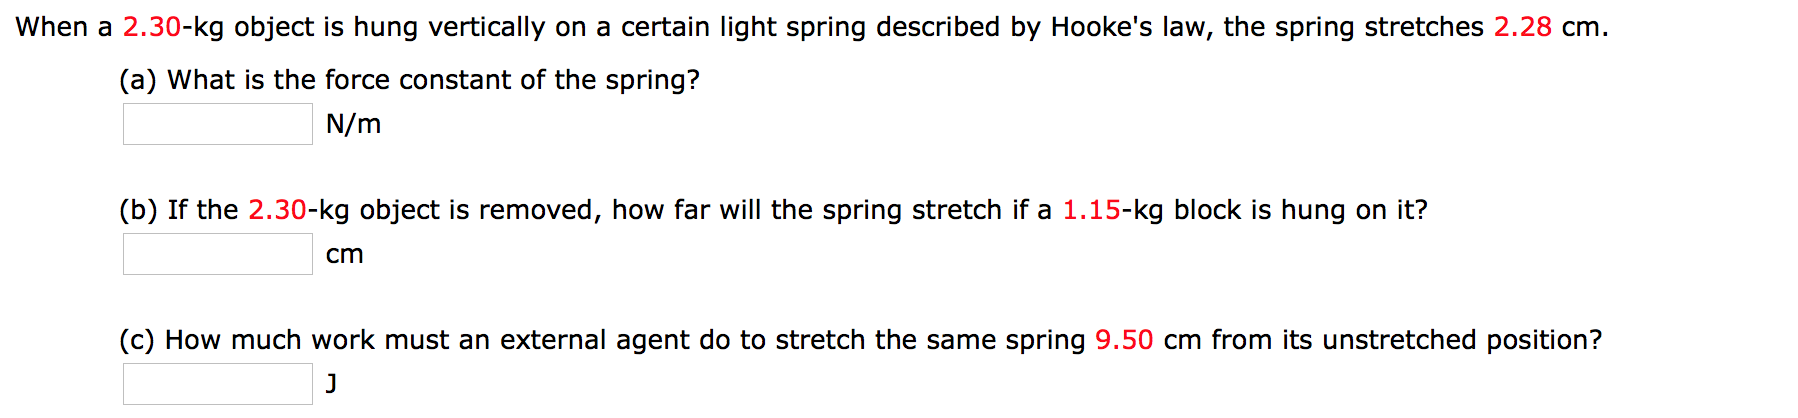 When a 2.30-kg object is hung vertically on a certain light spring described by Hooke's law, the spring stretches 2.28 cm
(a) What is the force constant of the spring?
N/m
(b) If the 2.30-kg object is removed, how far will the spring stretch if a 1.15-kg block is hung on it?
cm
(c) How much work must an external agent do to stretch the same spring 9.50 cm from its unstretched position?
J
